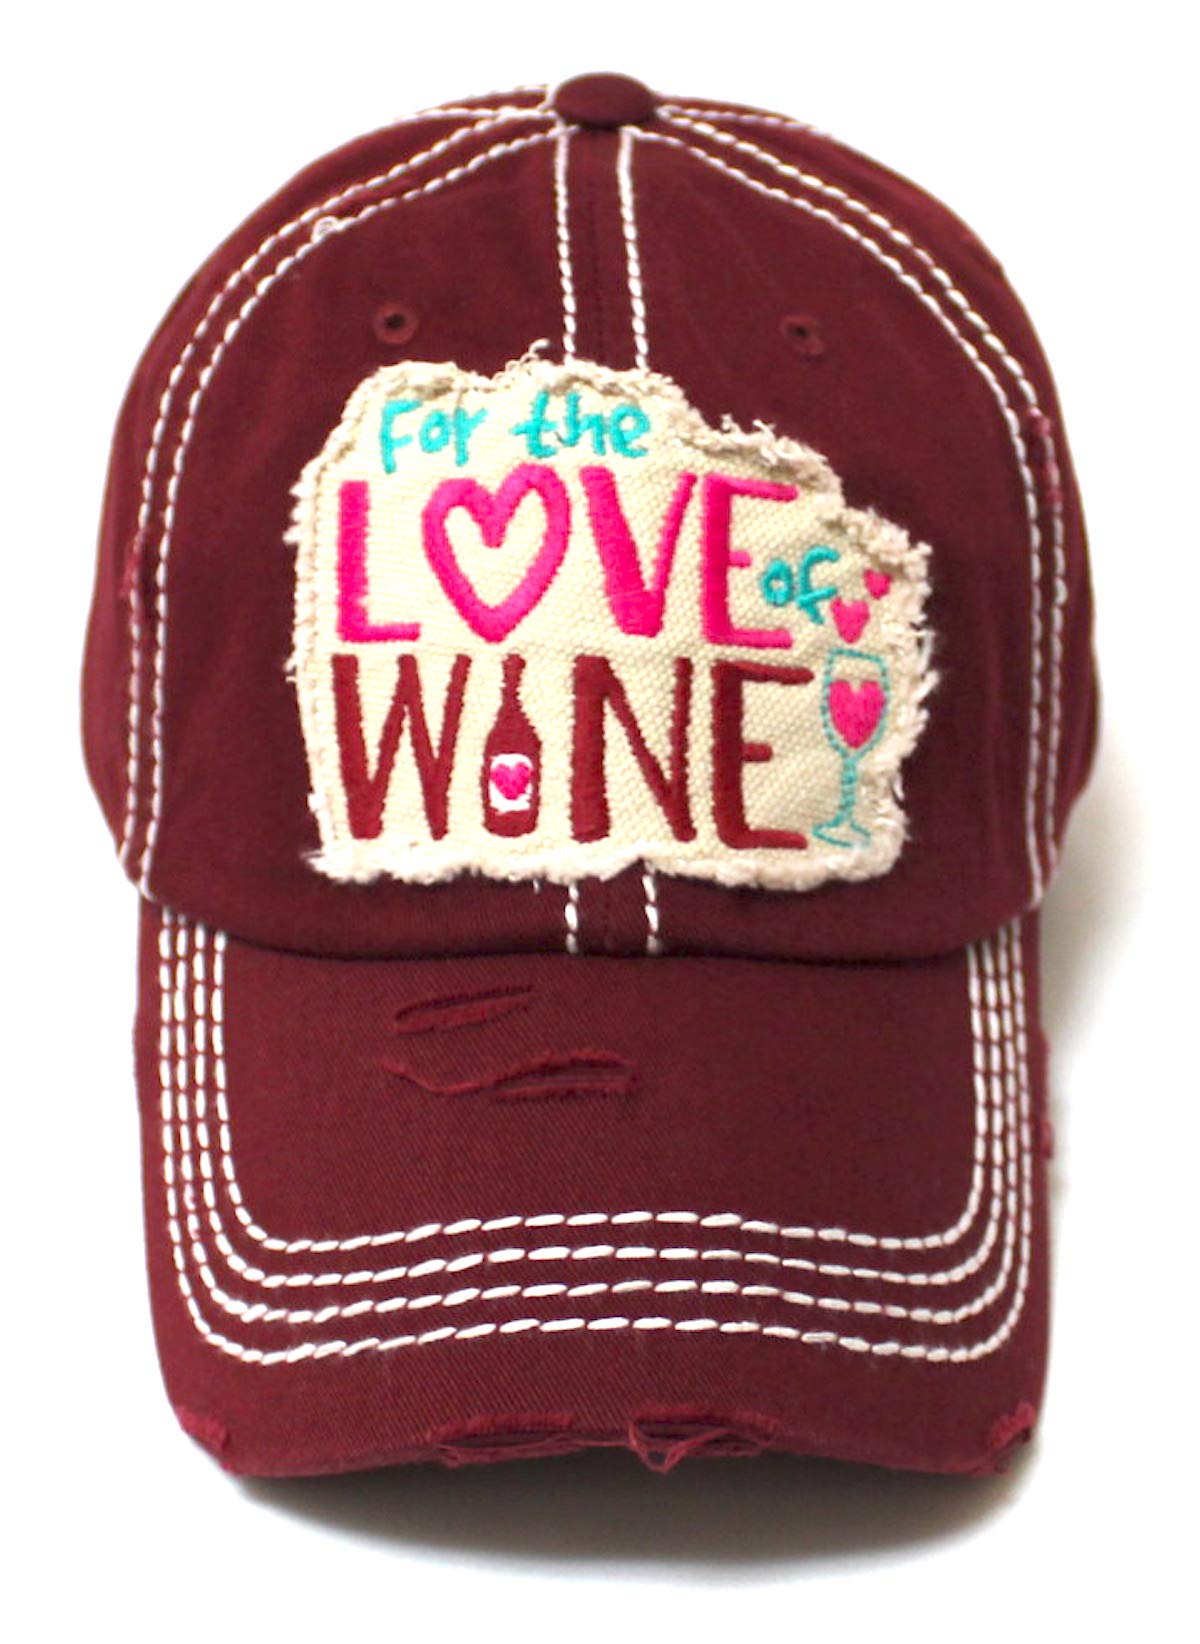 Women's Baseball Cap for The Love of Wine Patch Embroidery Hearts & Bubbles Monogram Hat, Vintage Burgundy - Caps 'N Vintage 